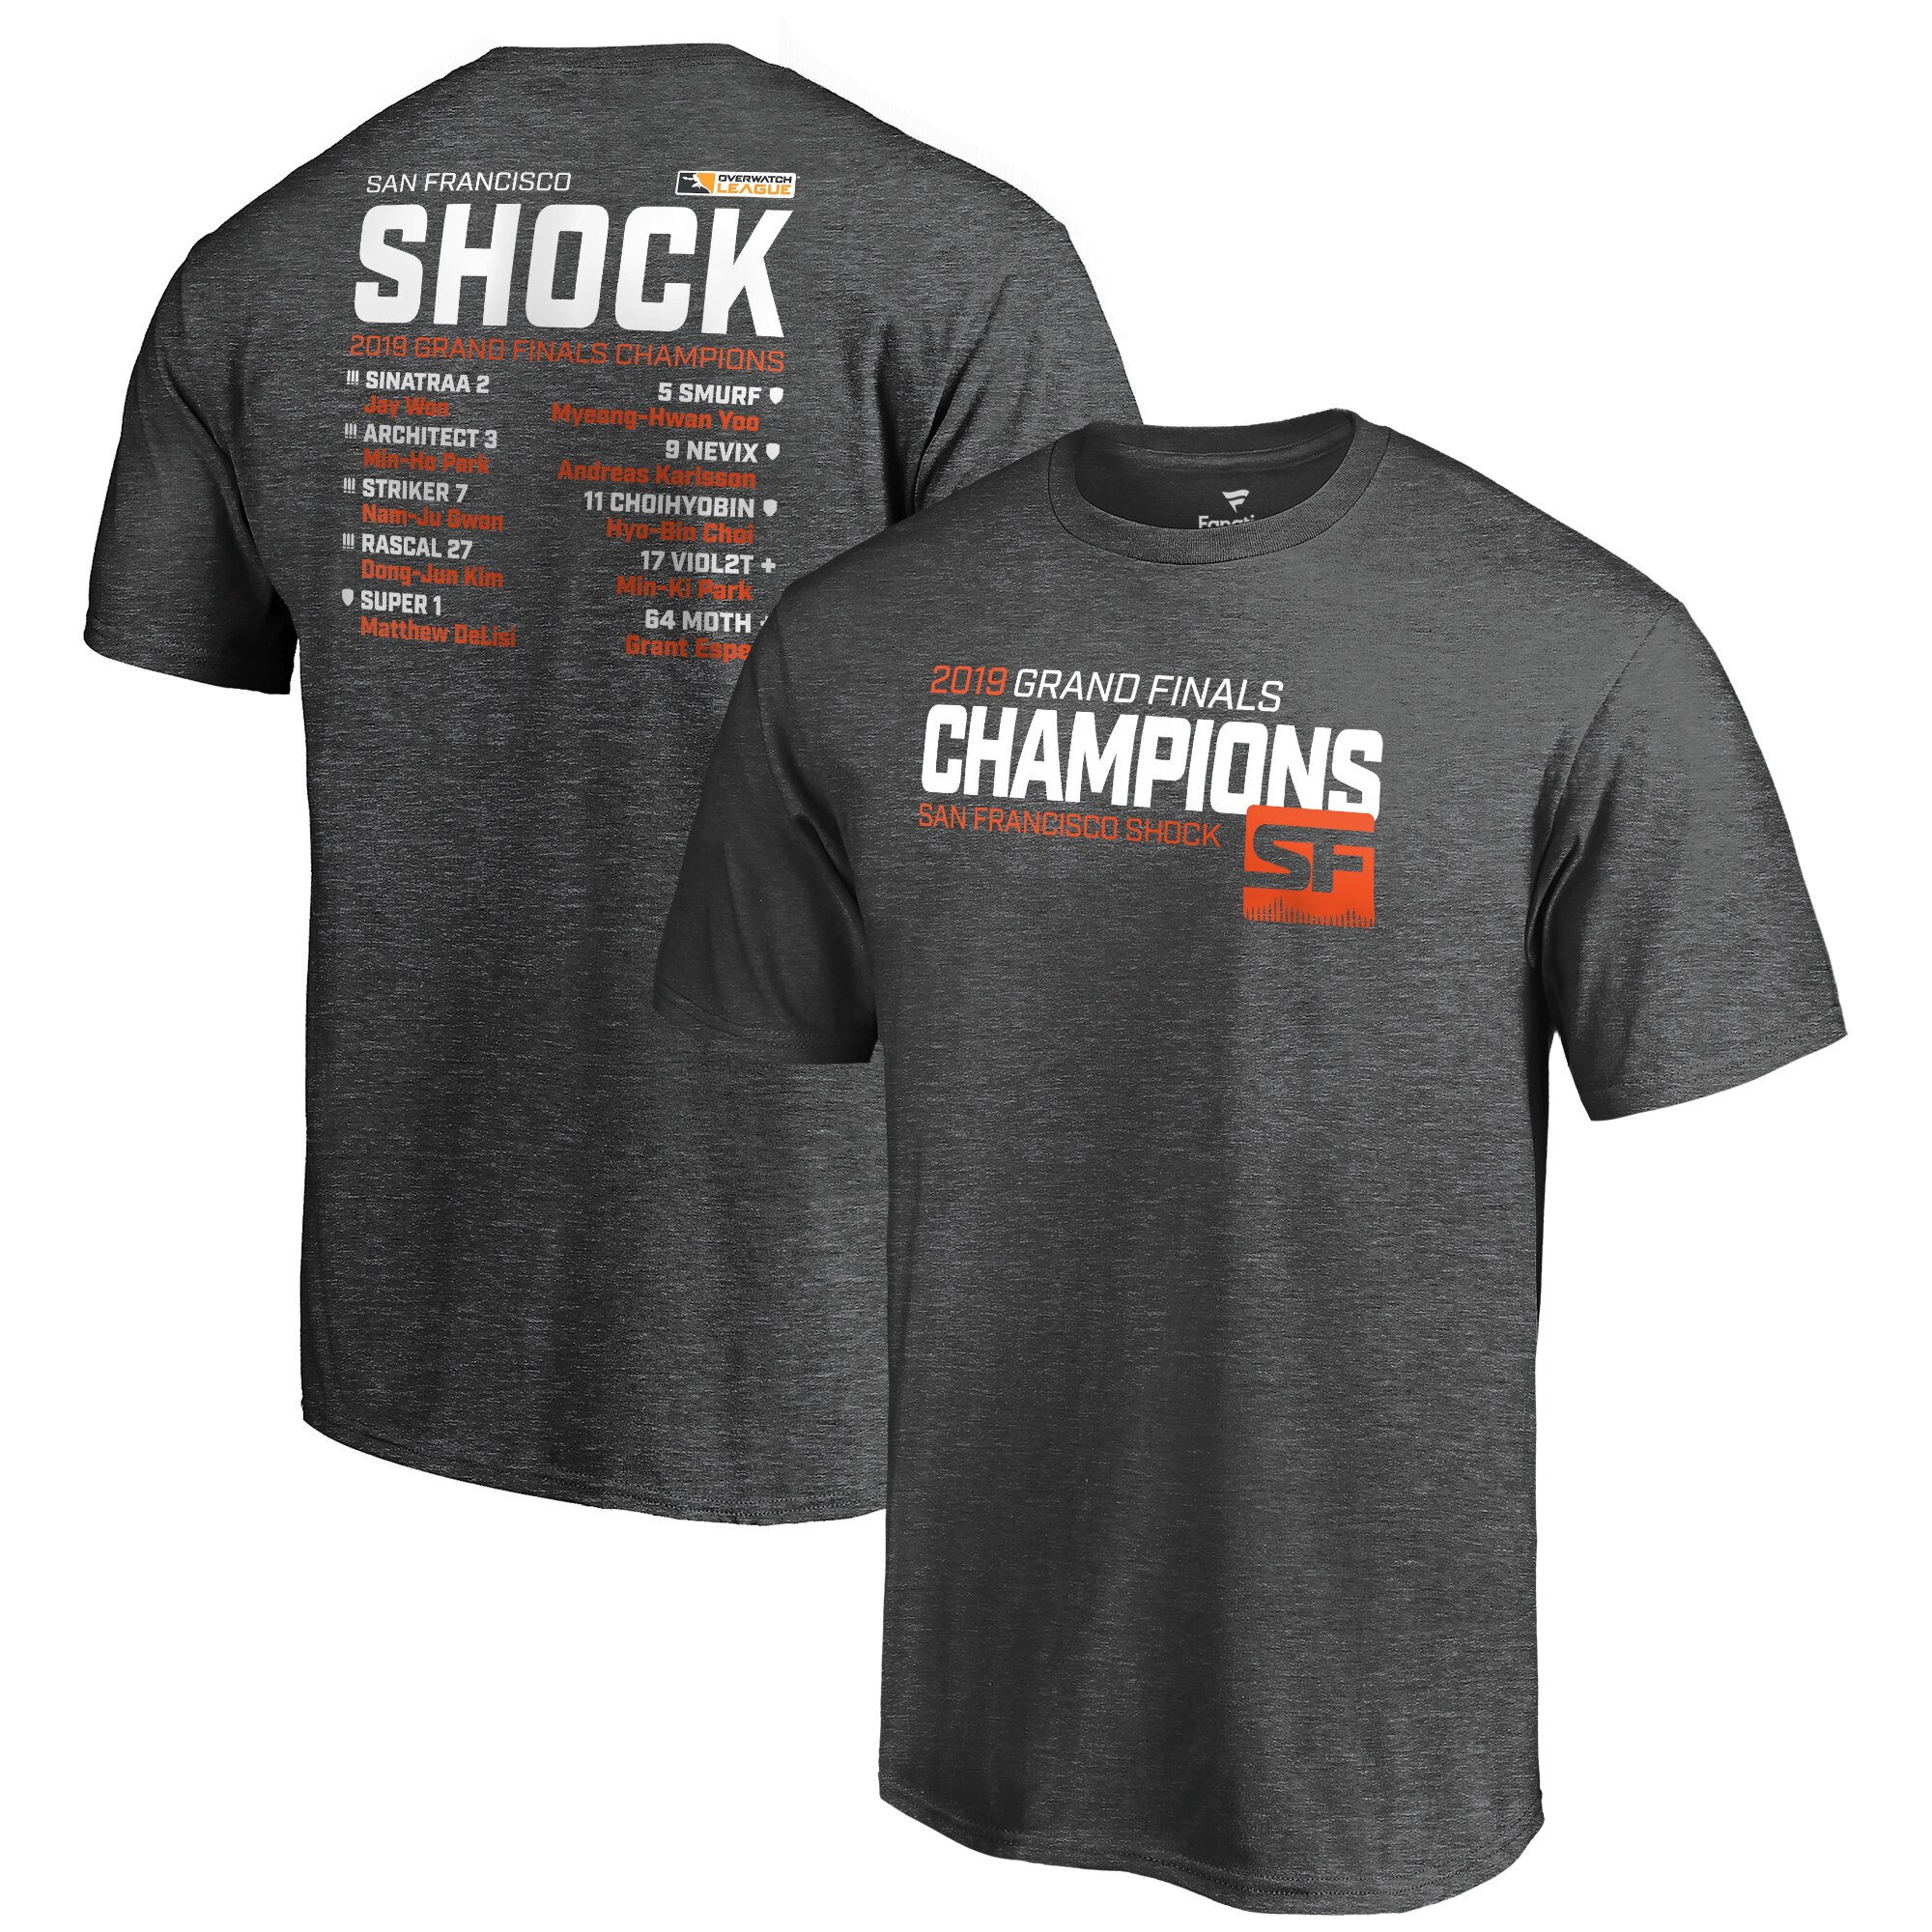 Shock championship t-shirt features player names